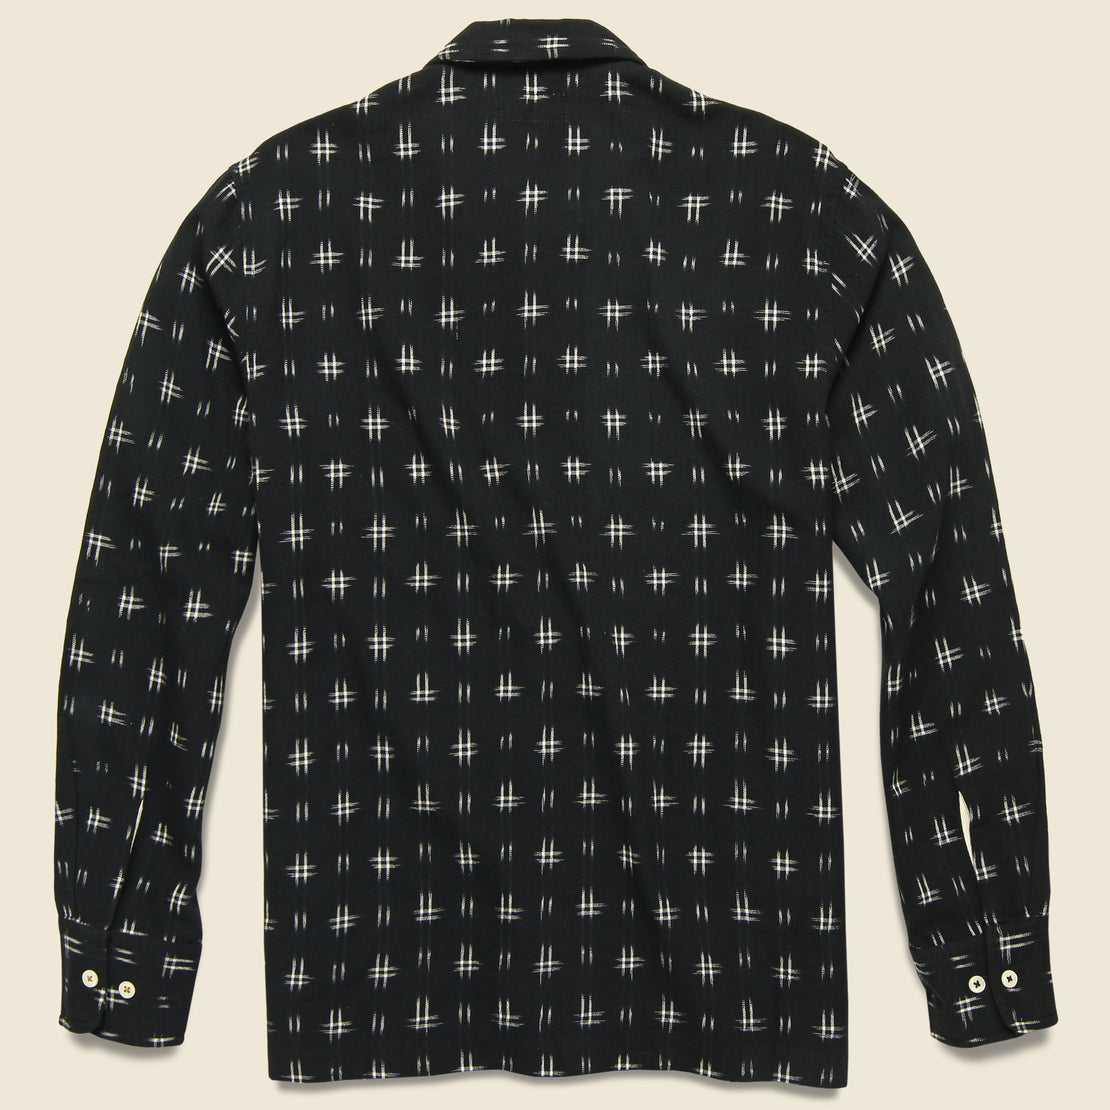 Garage Shirt - Black Ikat - Universal Works - STAG Provisions - Tops - L/S Woven - Other Pattern